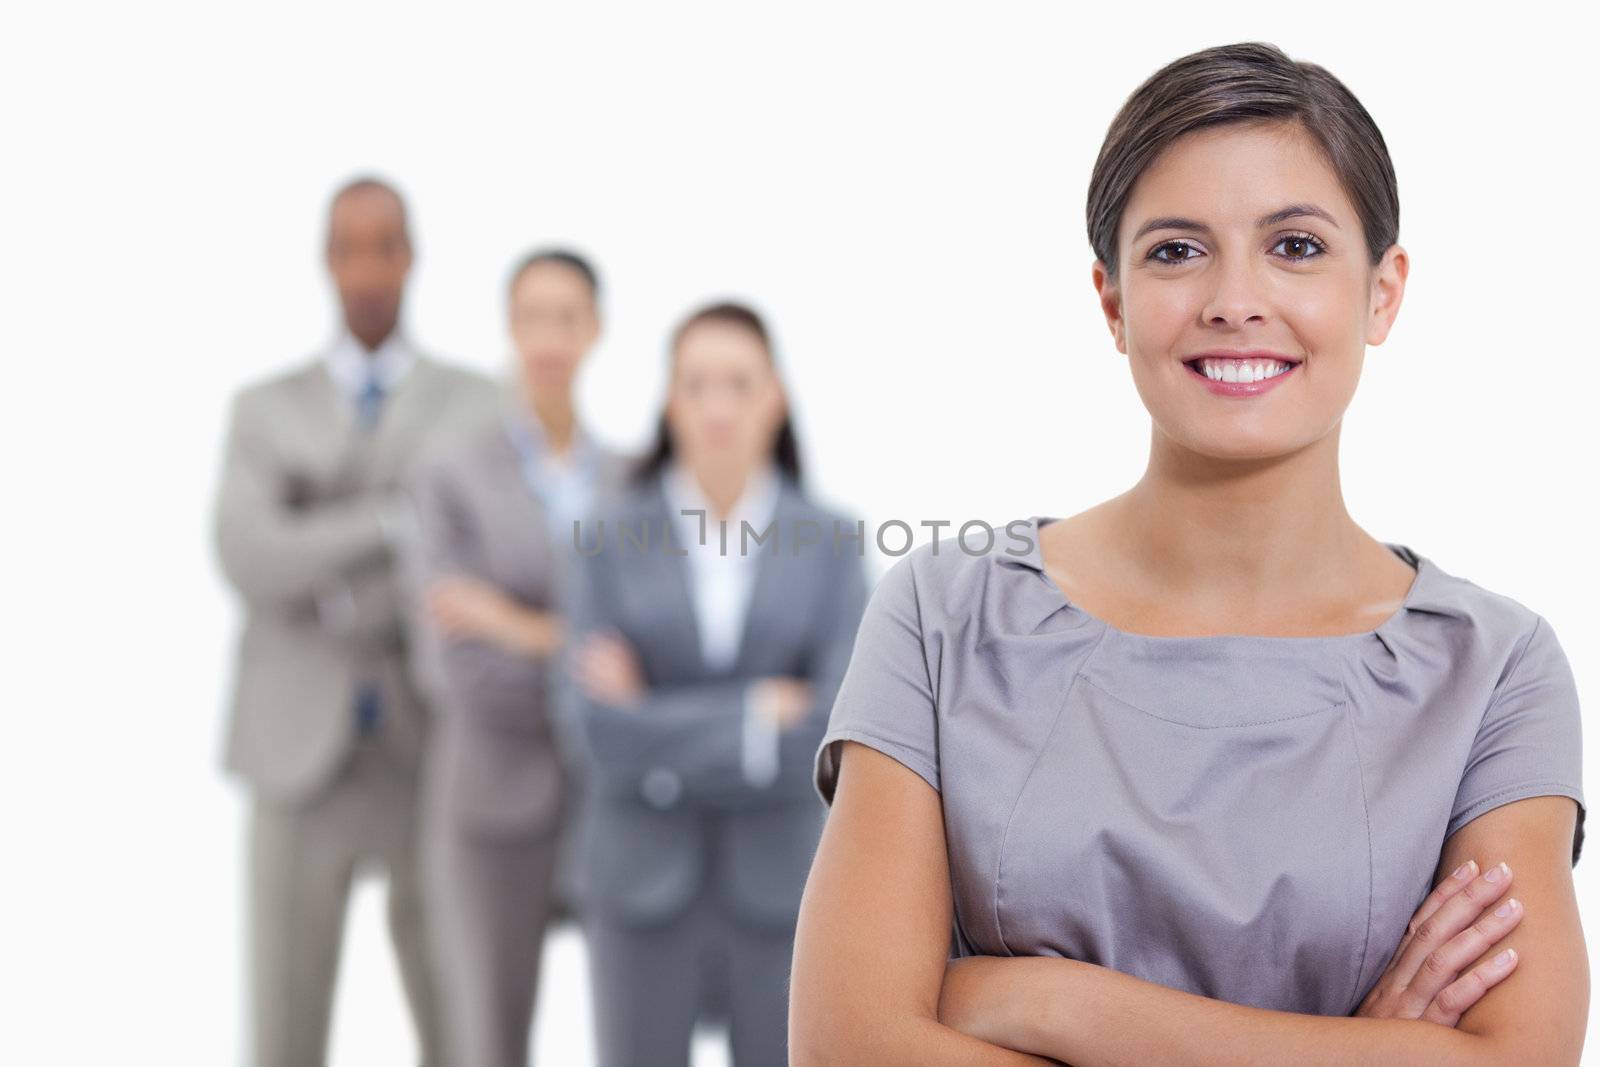 Close-up of a business team crossing their arms and standing behind each other with focus on the foreground woman who is smiling